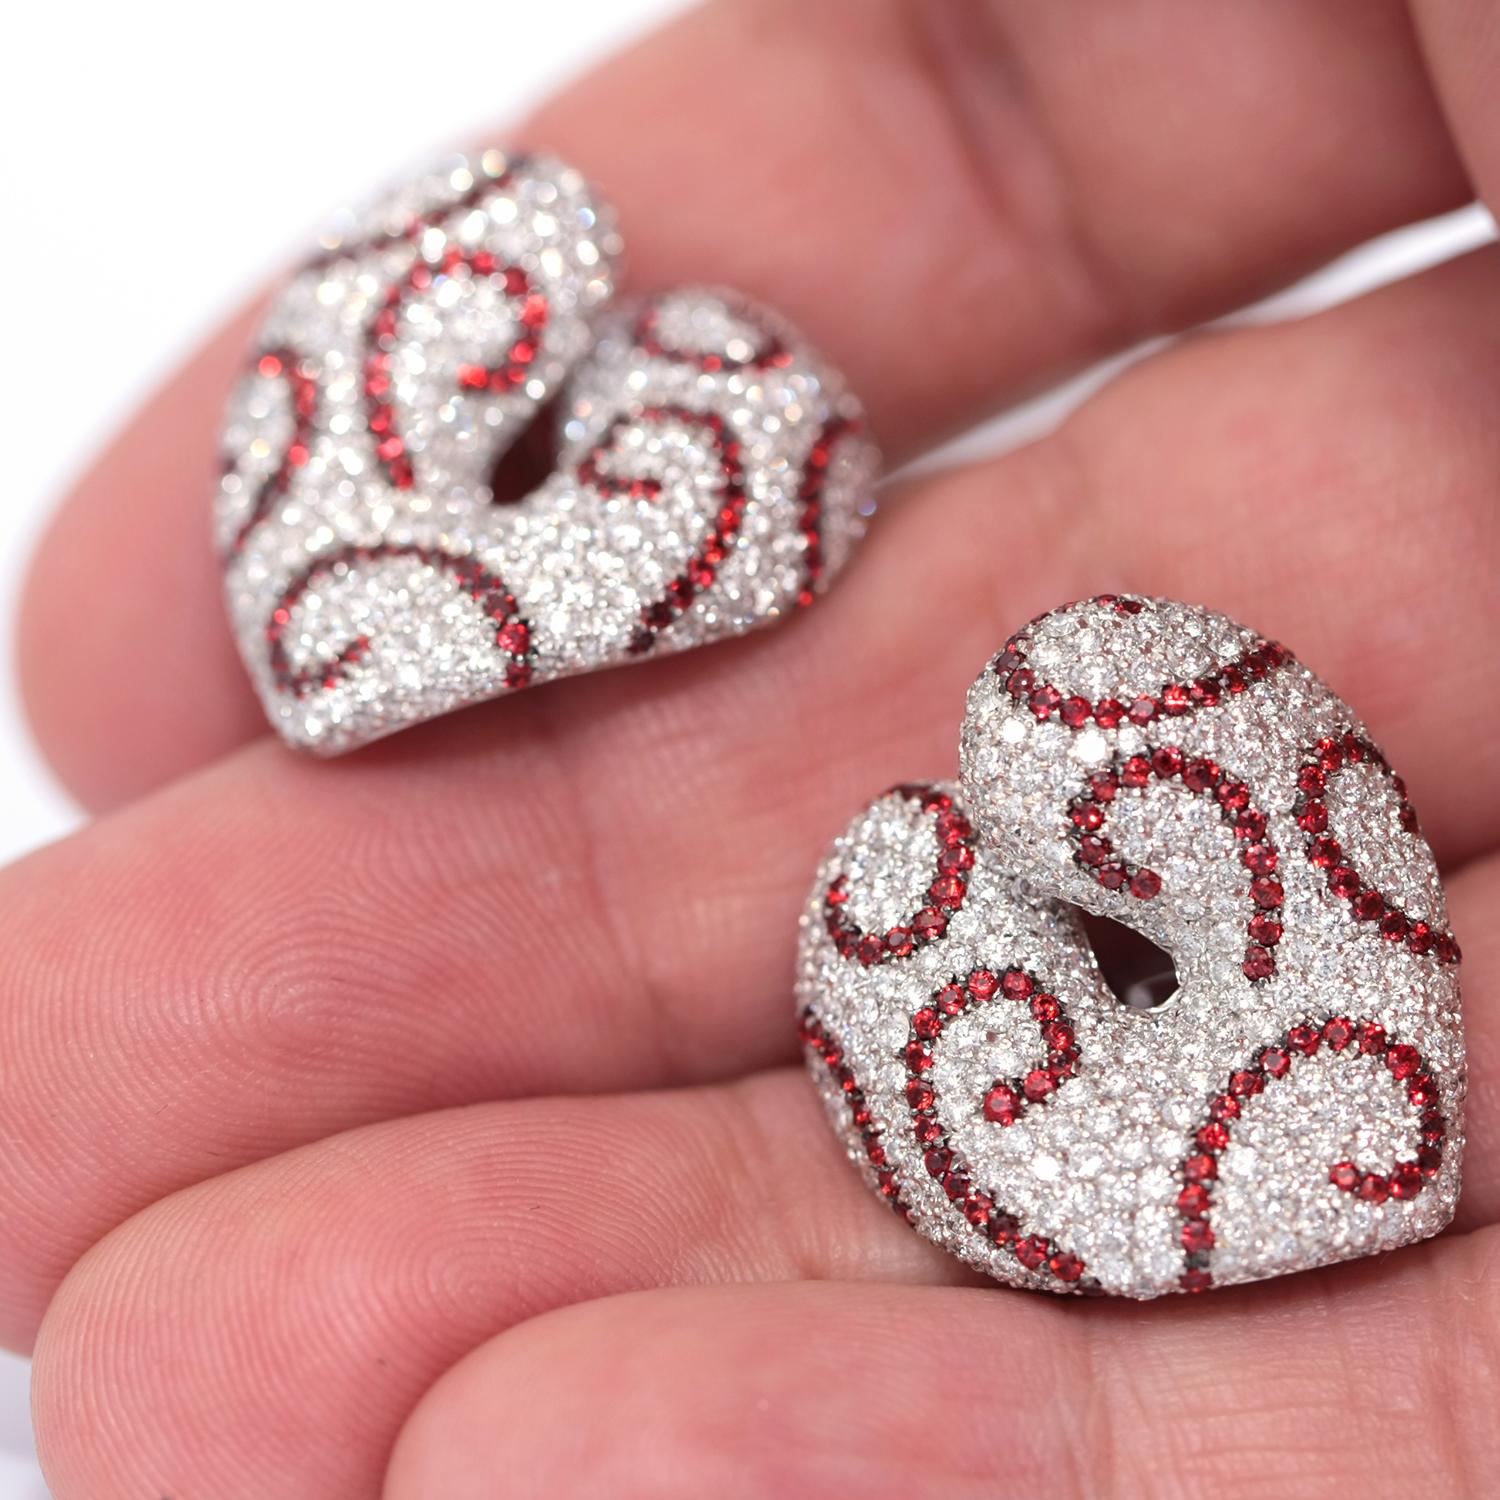 These lavish beautiful earrings,  designed by Italian designer Palmiero are paved with 3.82 carats of full-cut diamonds and 1.73 carats of red sapphires rubies.
White 18k Gold 
Weight: 24.05 Grams
Diamond average color: G
Diamond average clarity: